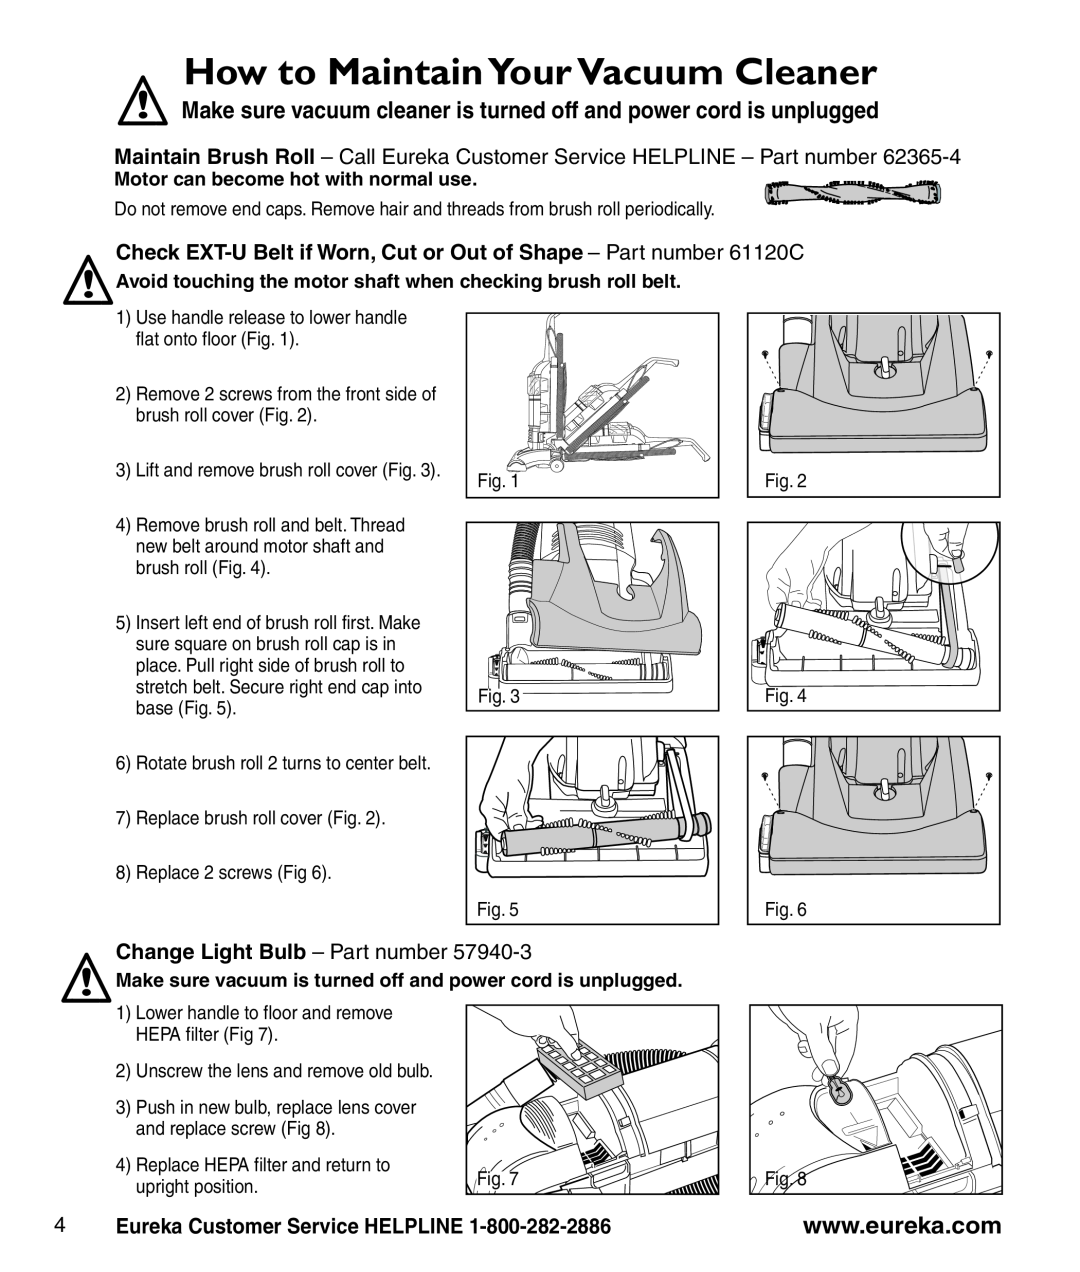 Eureka 2950-2996 Series manual How to Maintain Your Vacuum Cleaner, Change Light Bulb - Part number 